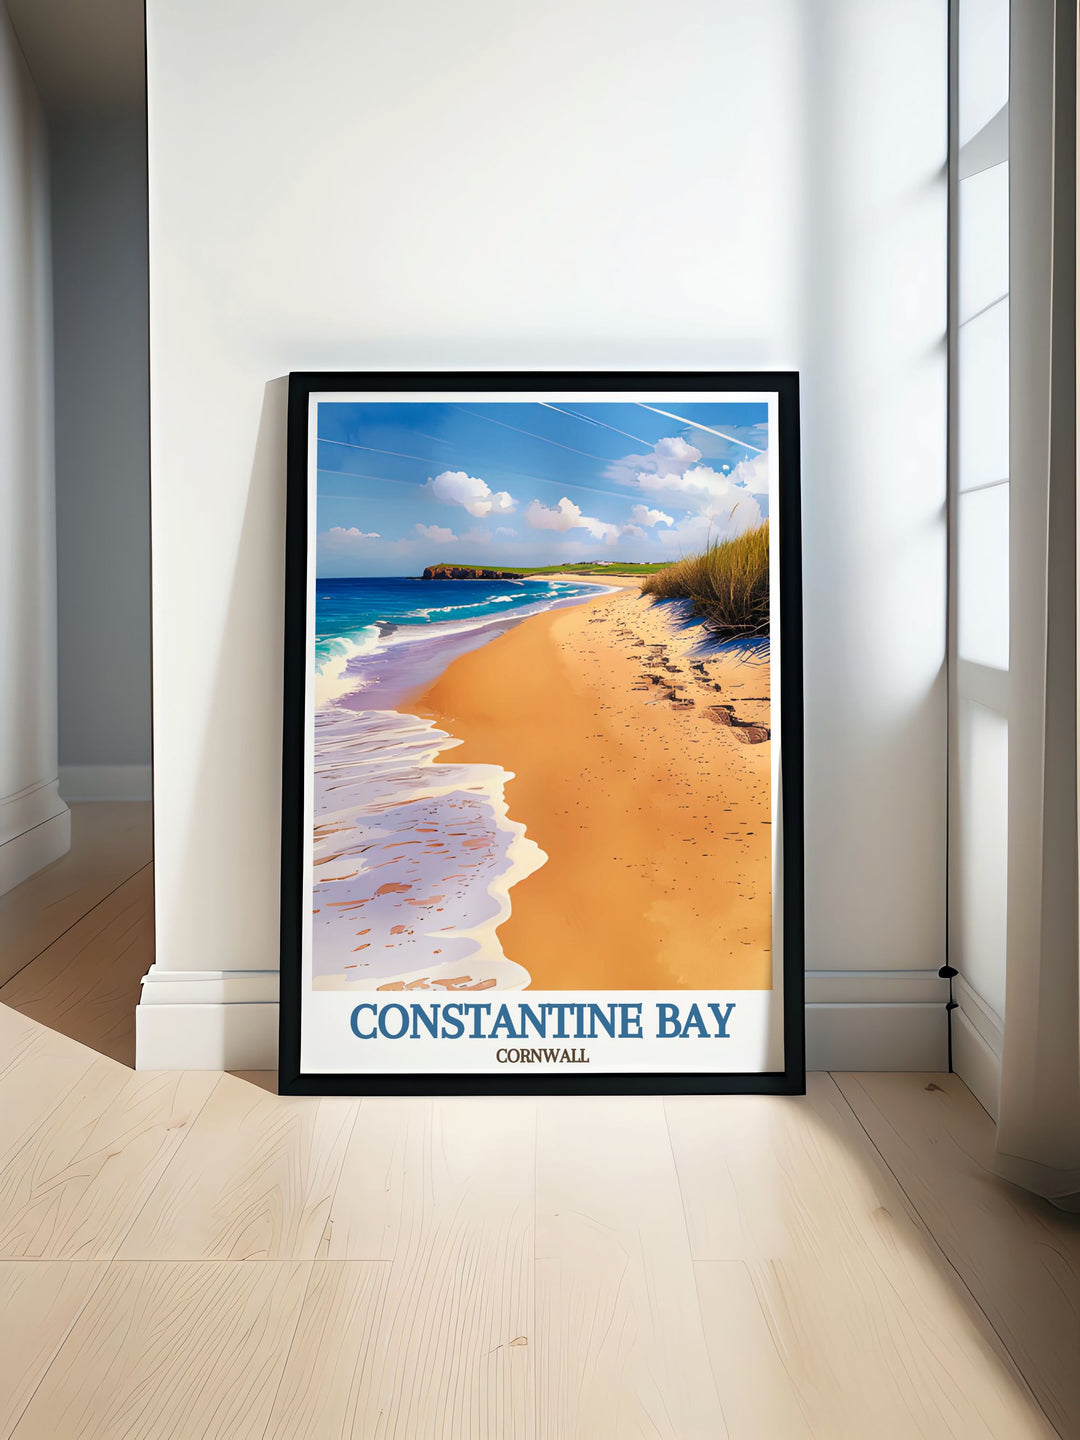 Relax and enjoy the peaceful ambiance of Constantine Bay Beach in Cornwall, England. The combination of golden sands, clear waters, and dramatic cliffs creates a perfect environment for leisurely walks, picnics, and scenic views.